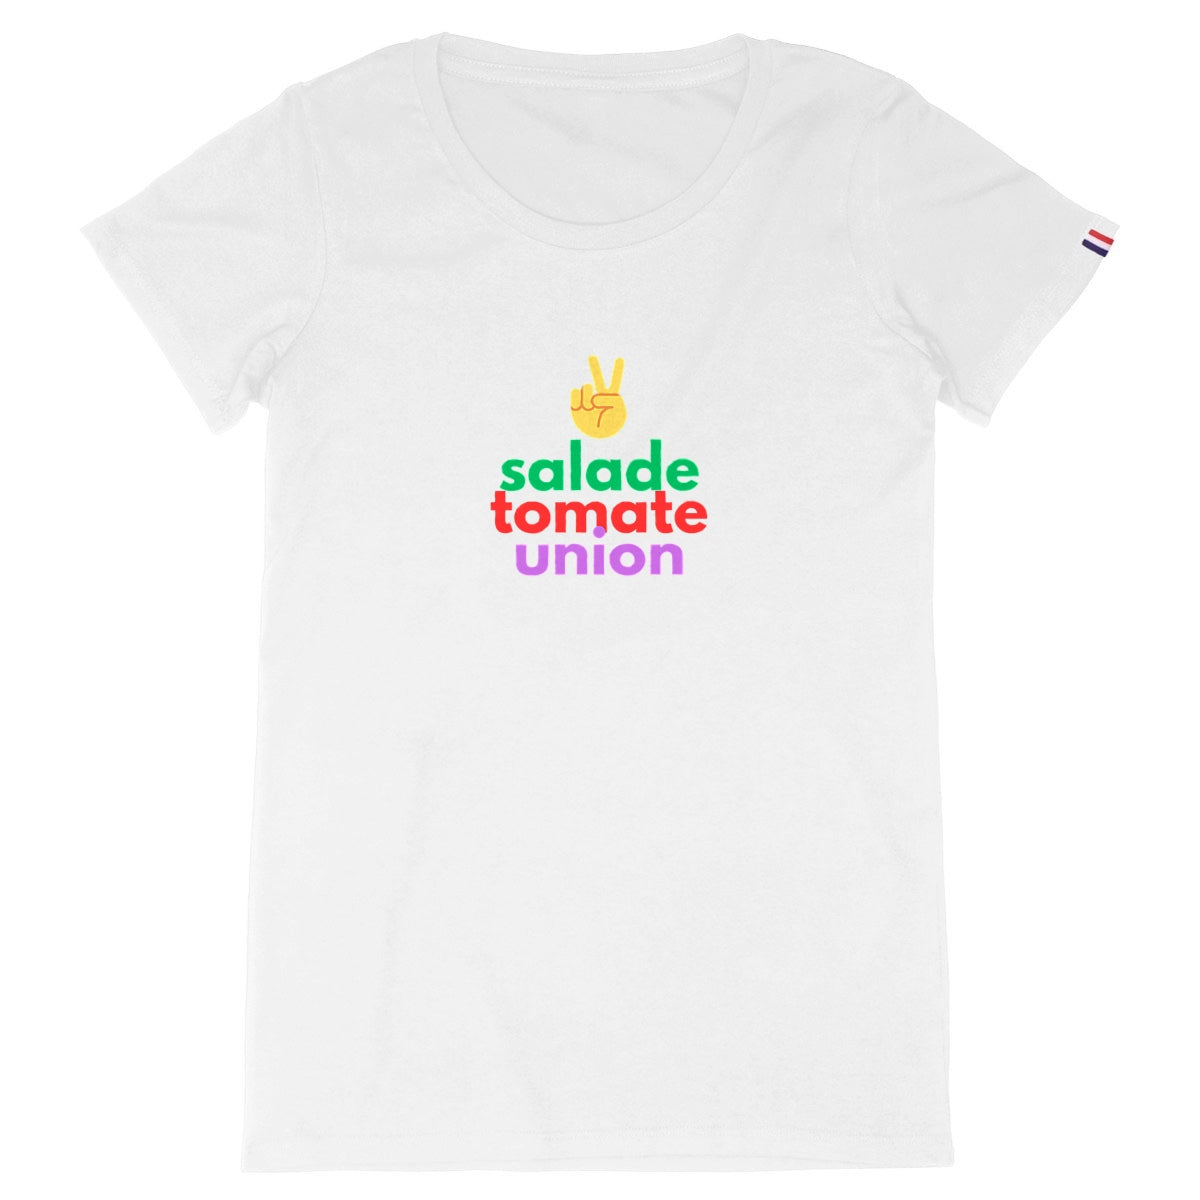 T-shirt Femme Made in France 100% Coton Bio Salade Tomate Union